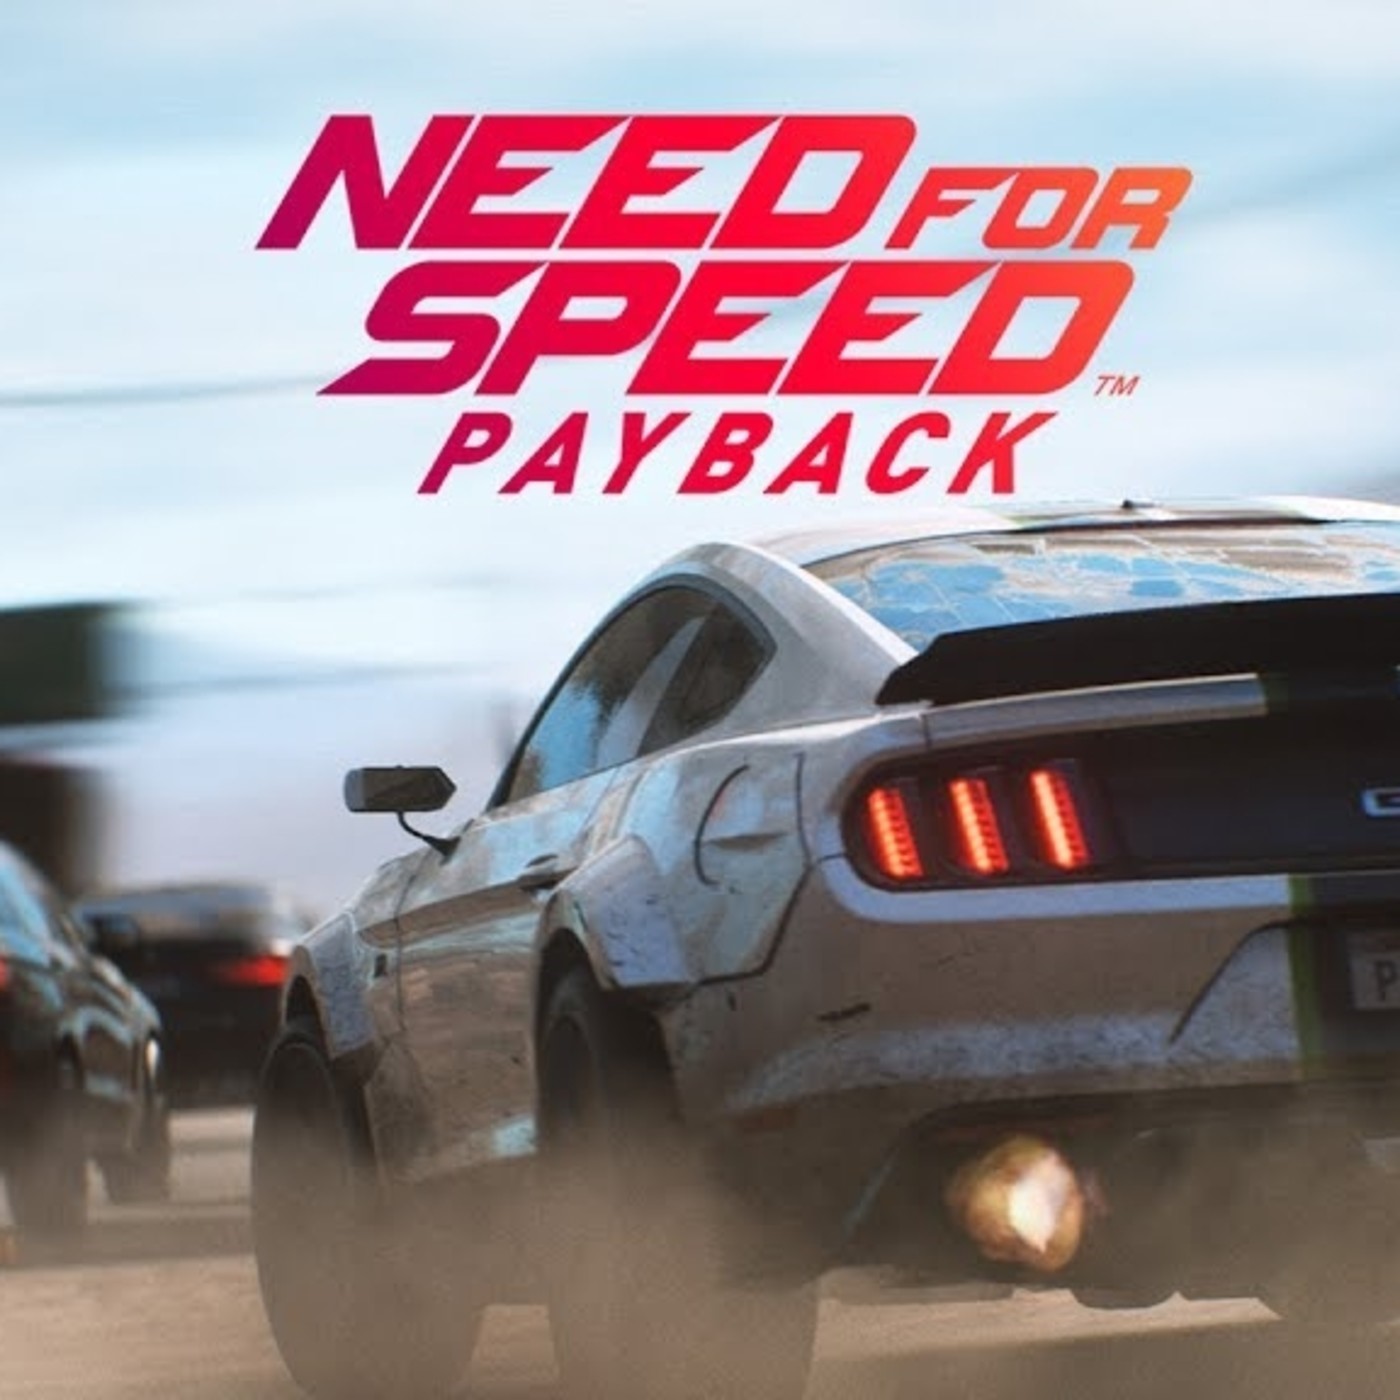 Need for Speed пейбек. Need for Speed Payback (ps4). Пэйбэк 3. NFS Payback ps5. Need for speed playback